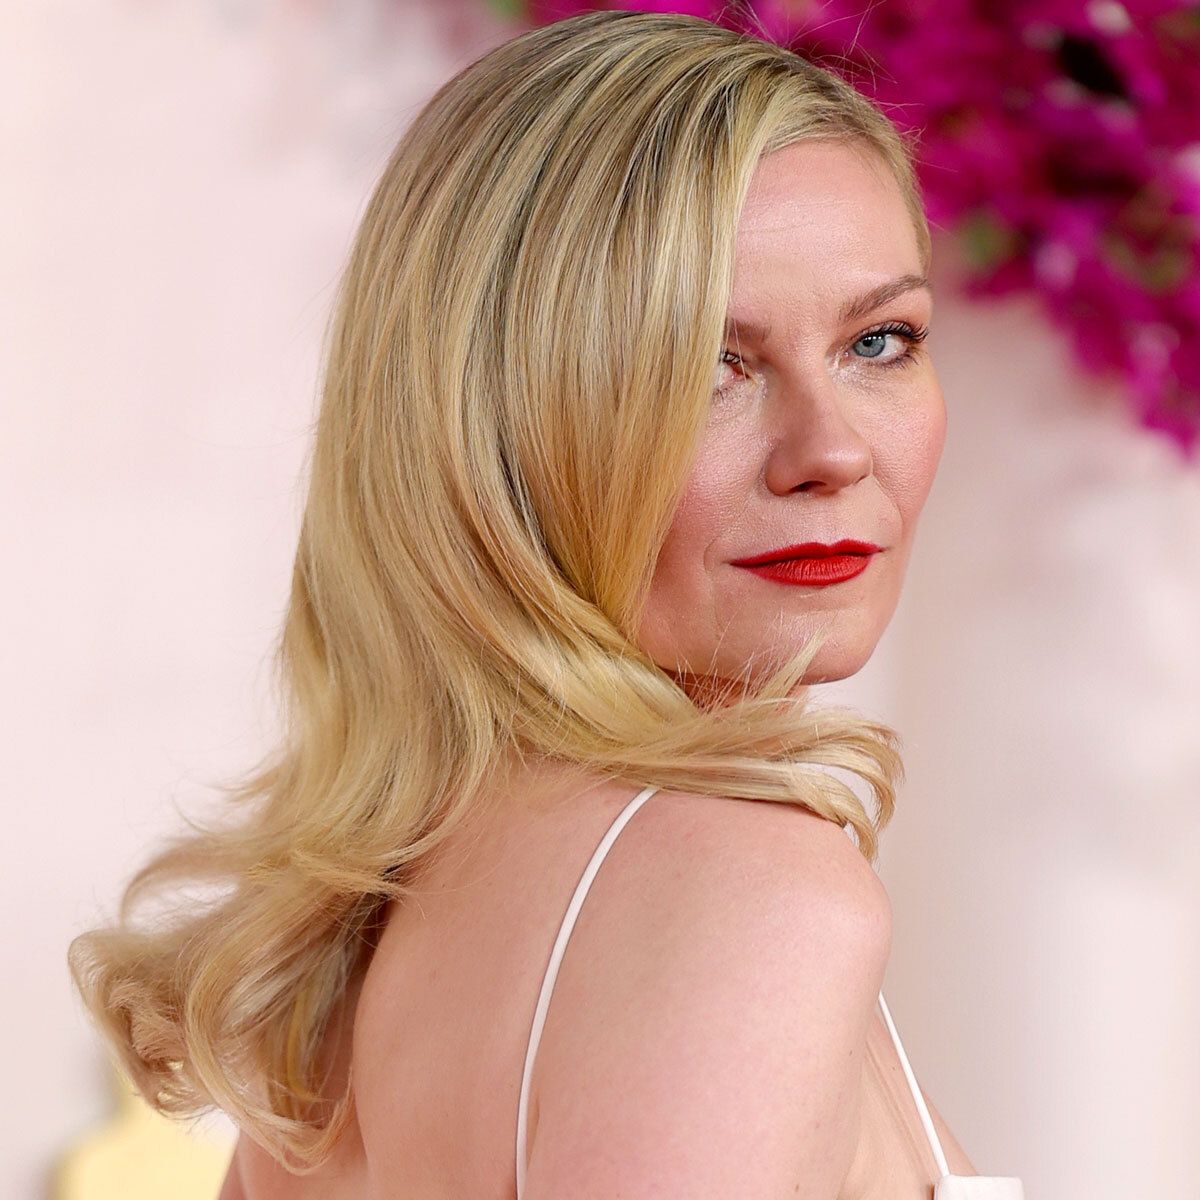 Kirsten Dunst Wore a ’90s Minimalist Dress to the Oscars